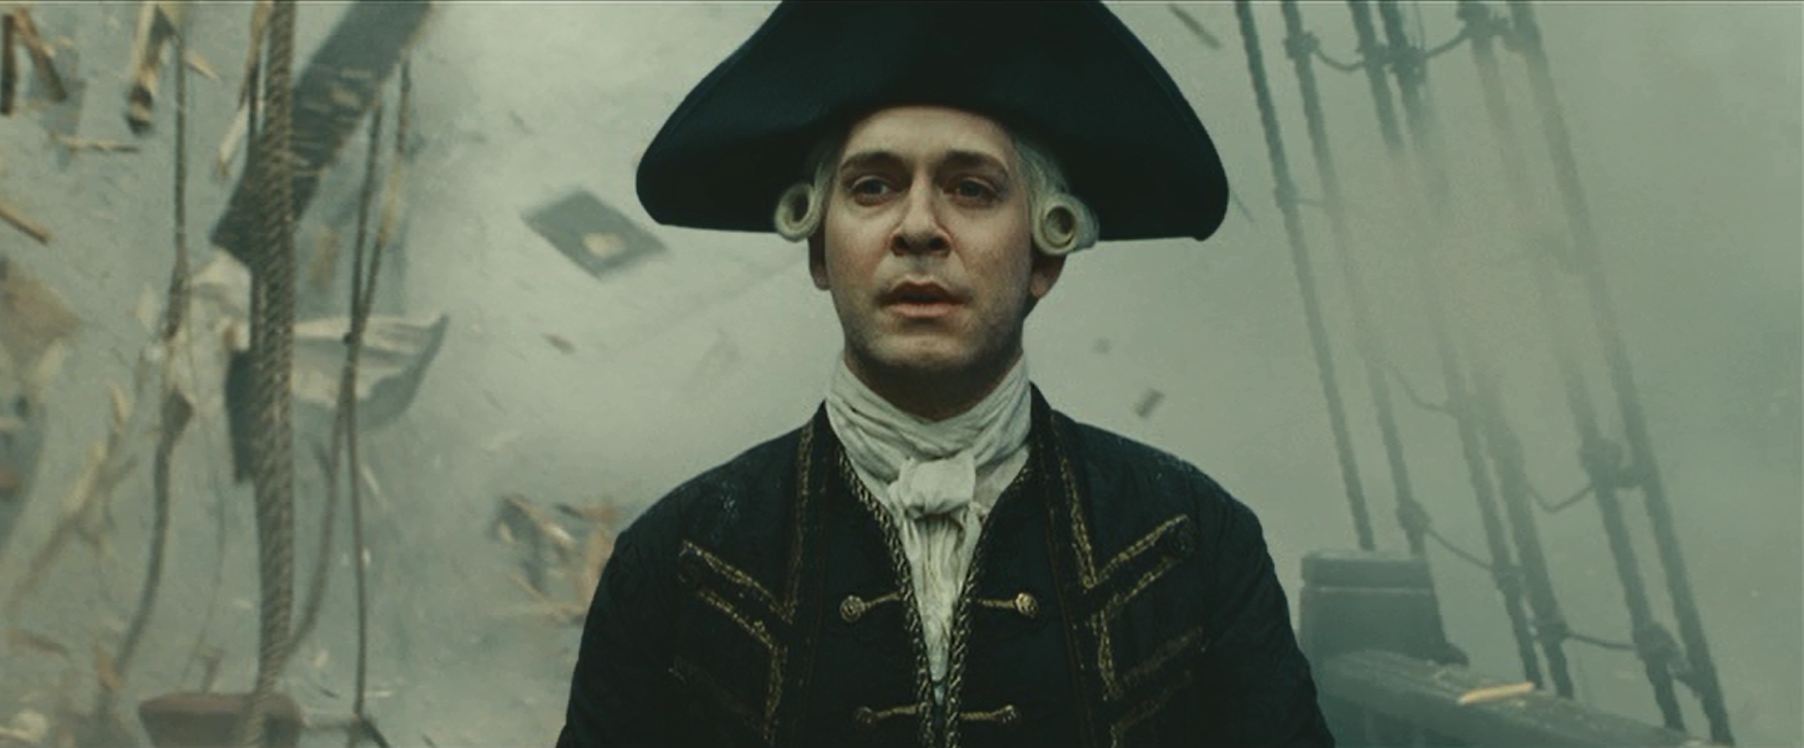 lord cutler beckett pirates of the caribbean series on lord cutler beckett pirates of the caribbean series wallpapers